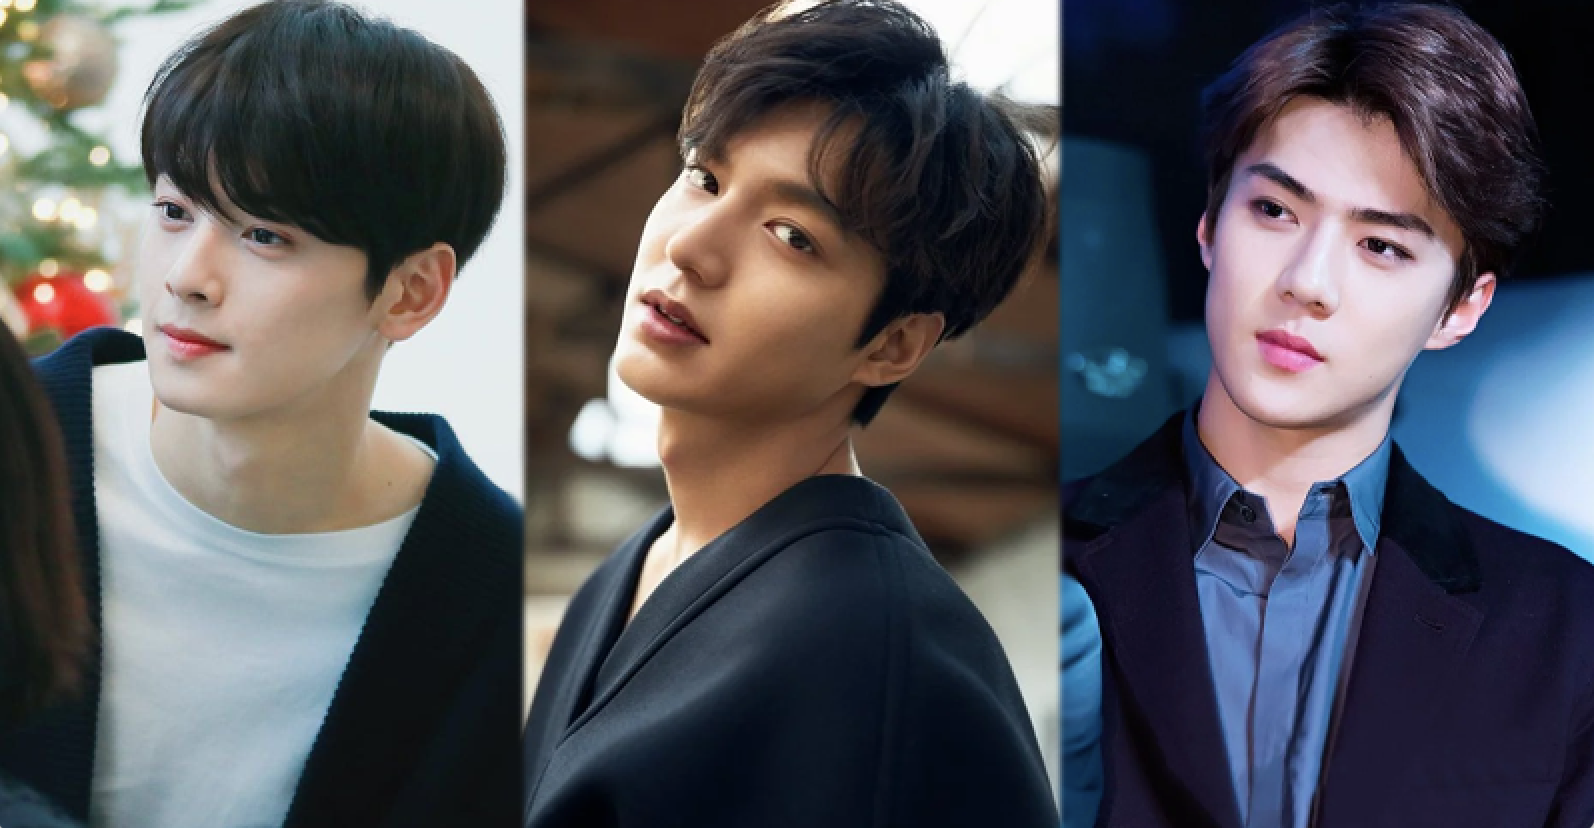 Top 15 Male Korean Celebrities Have The Most Followers On Instagram